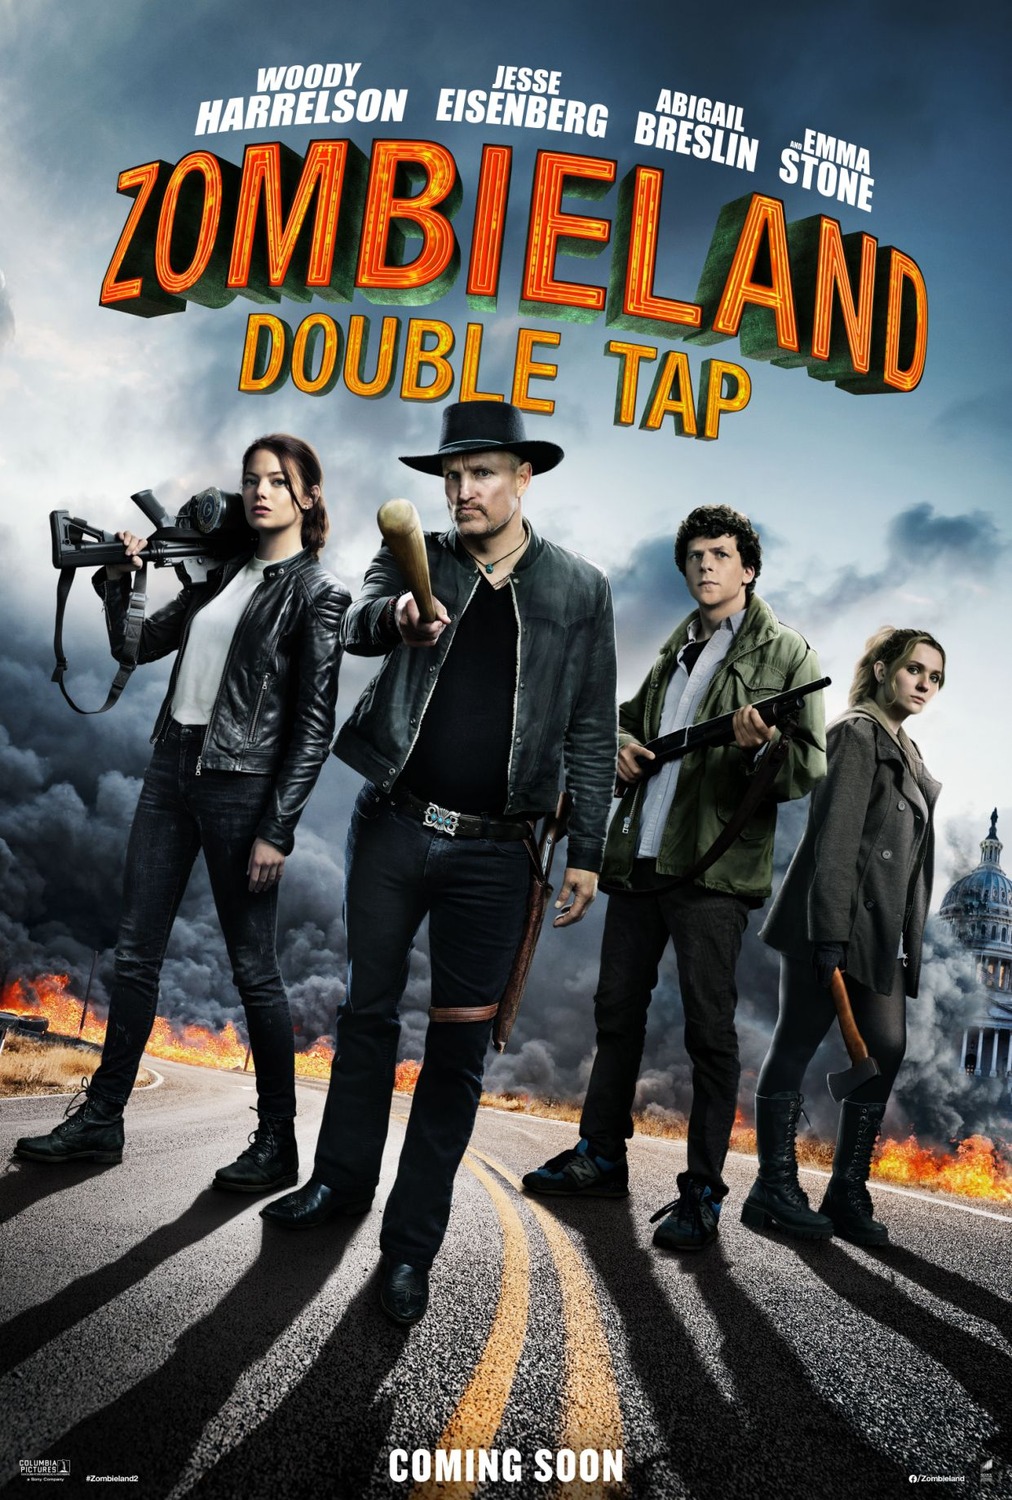 Zombieland: Double Tap film review: back for gore ten years later